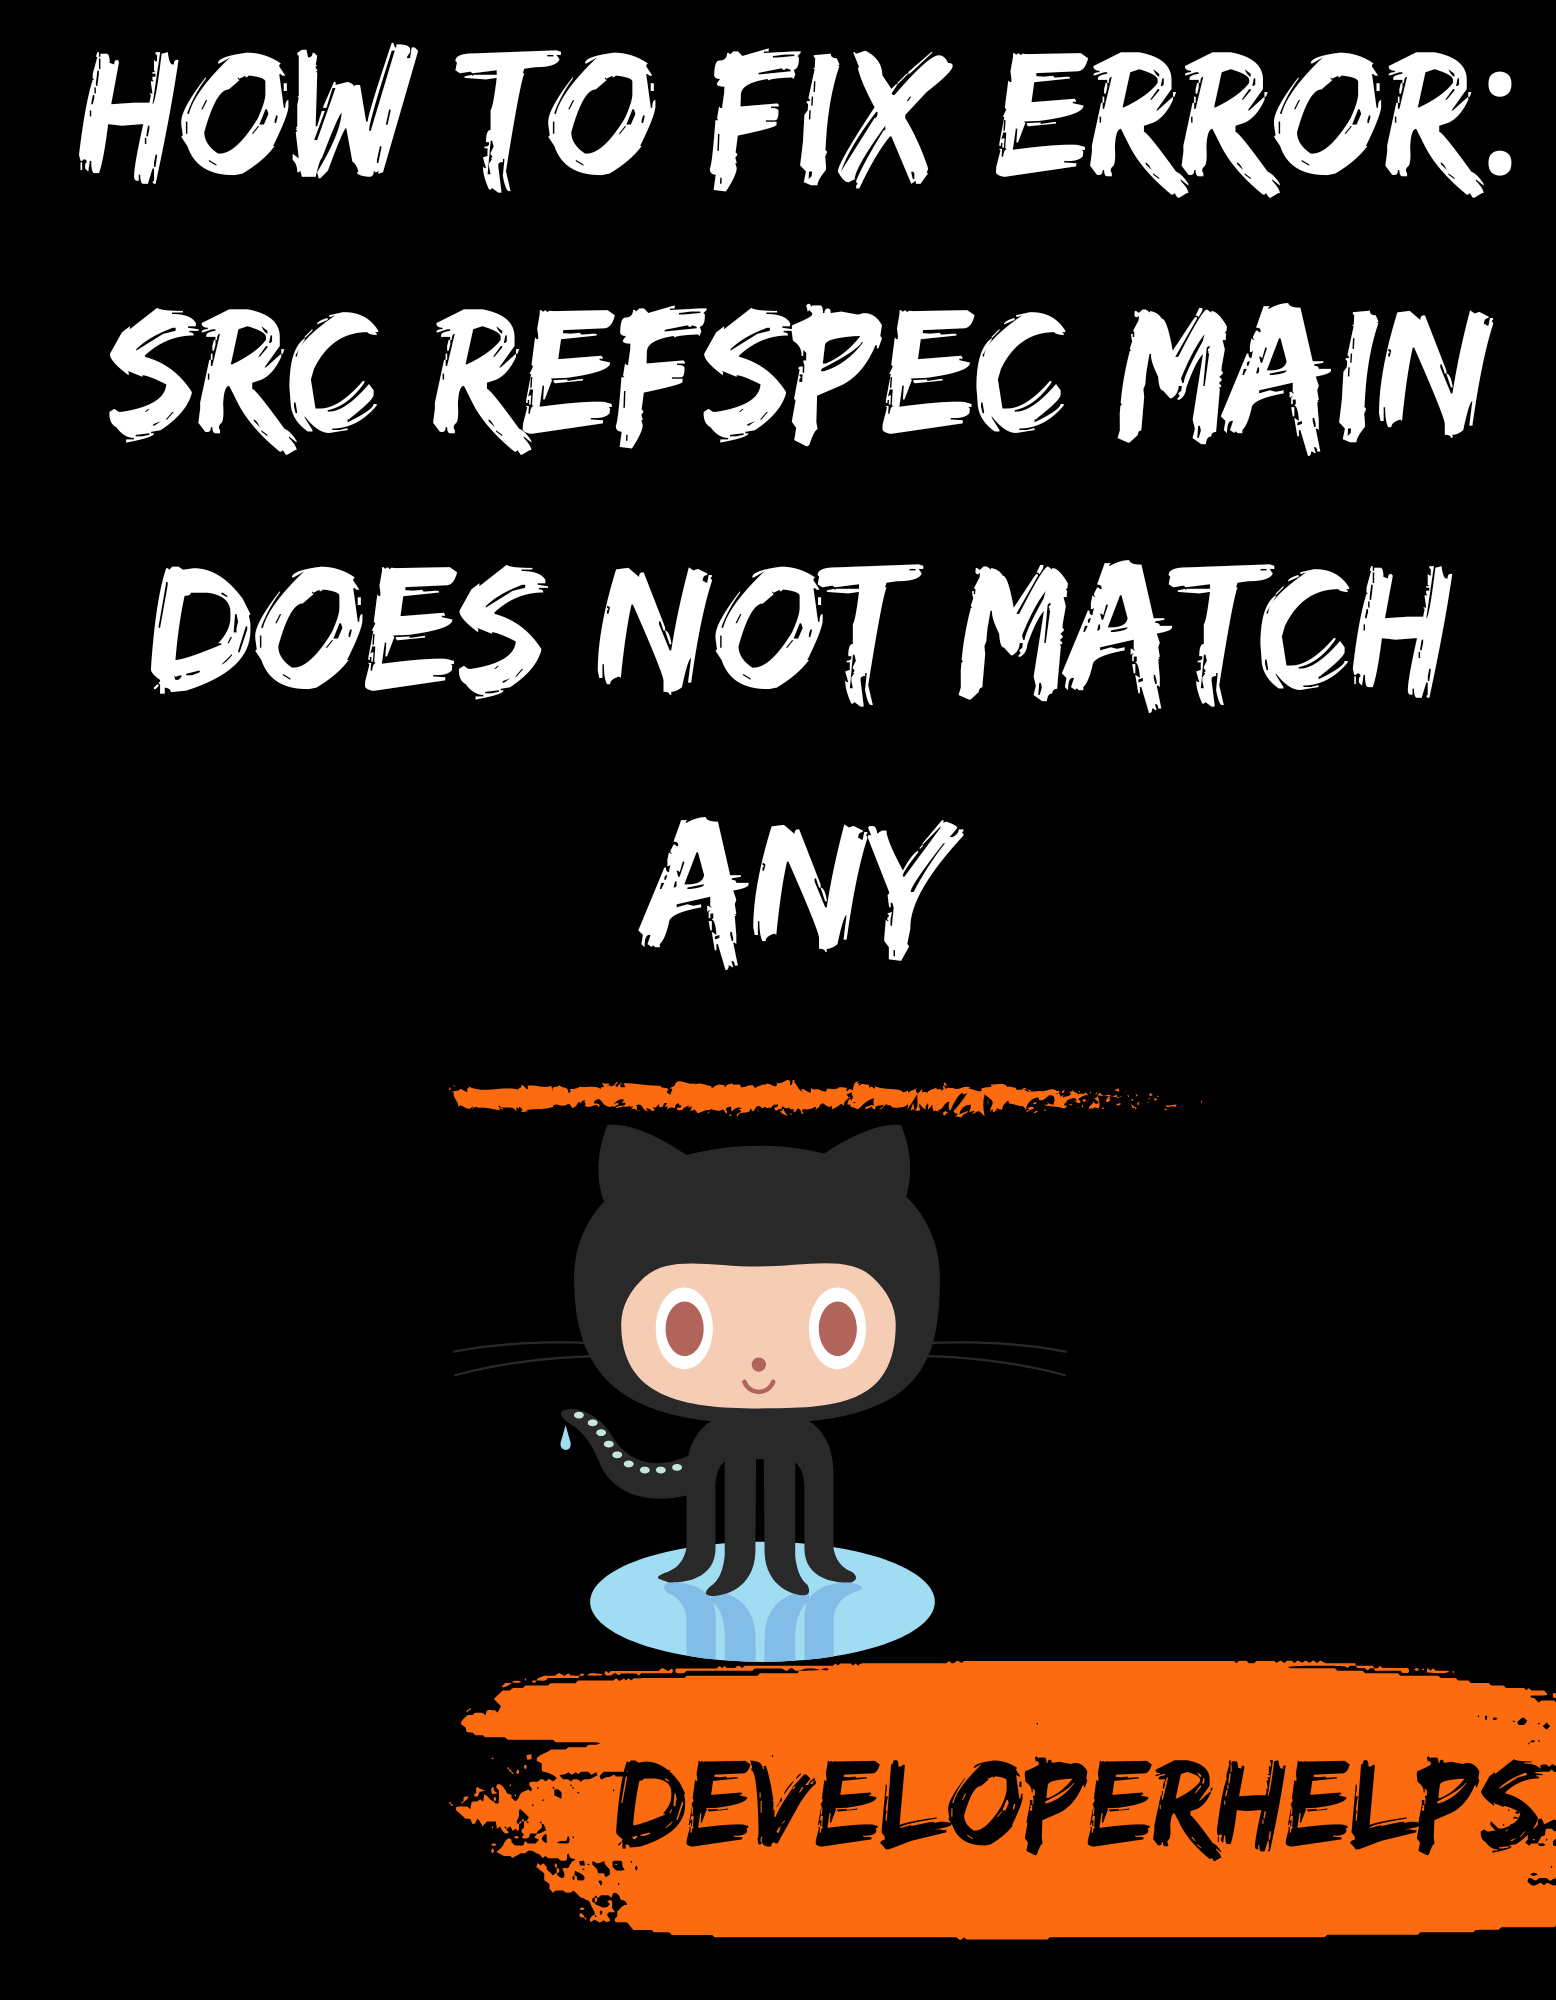 src refspec main does not match any